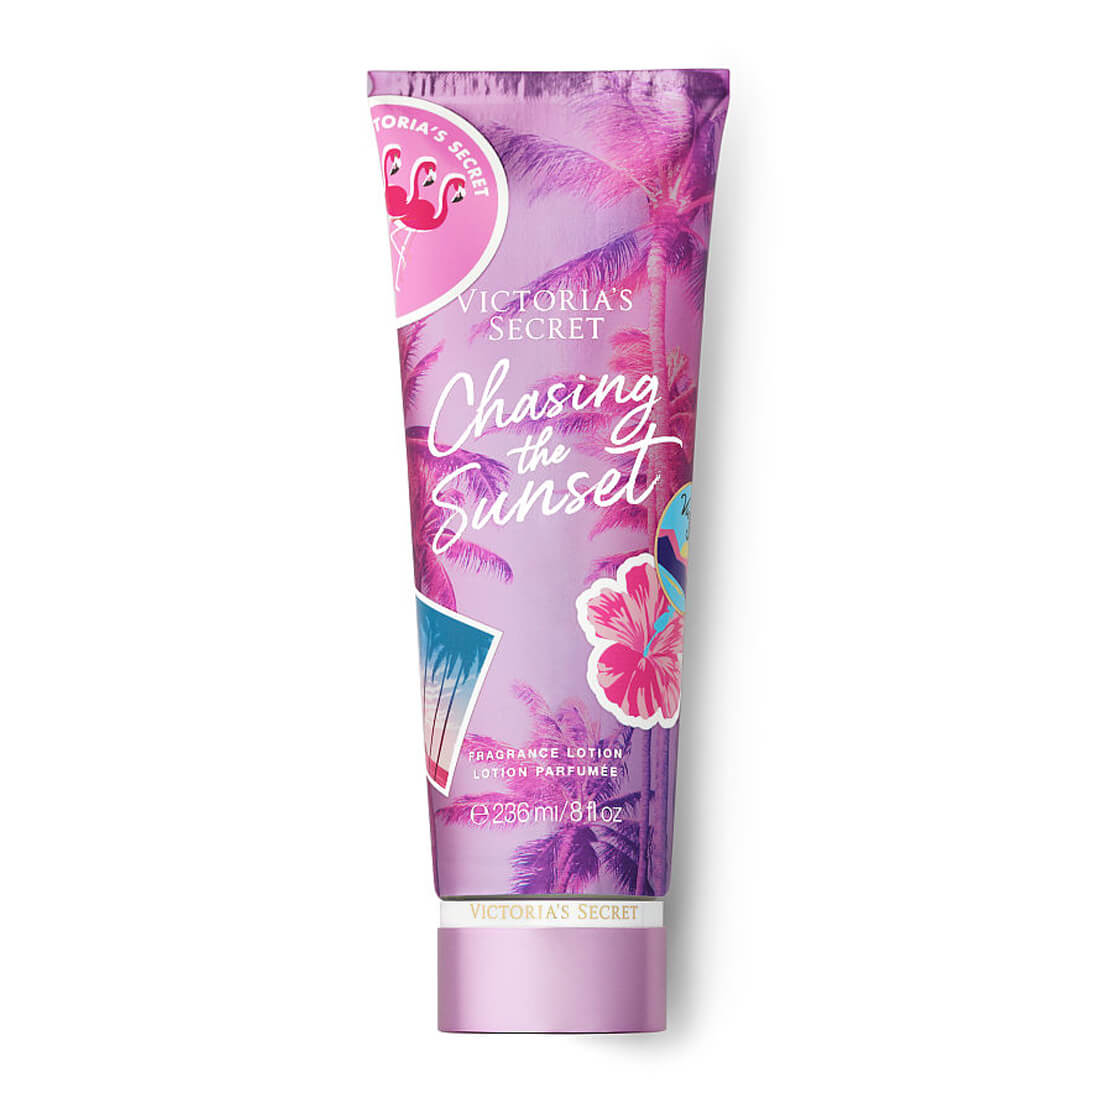 Victoria's Secret Chasing In The Sunset Fragrance Lotion 236ml